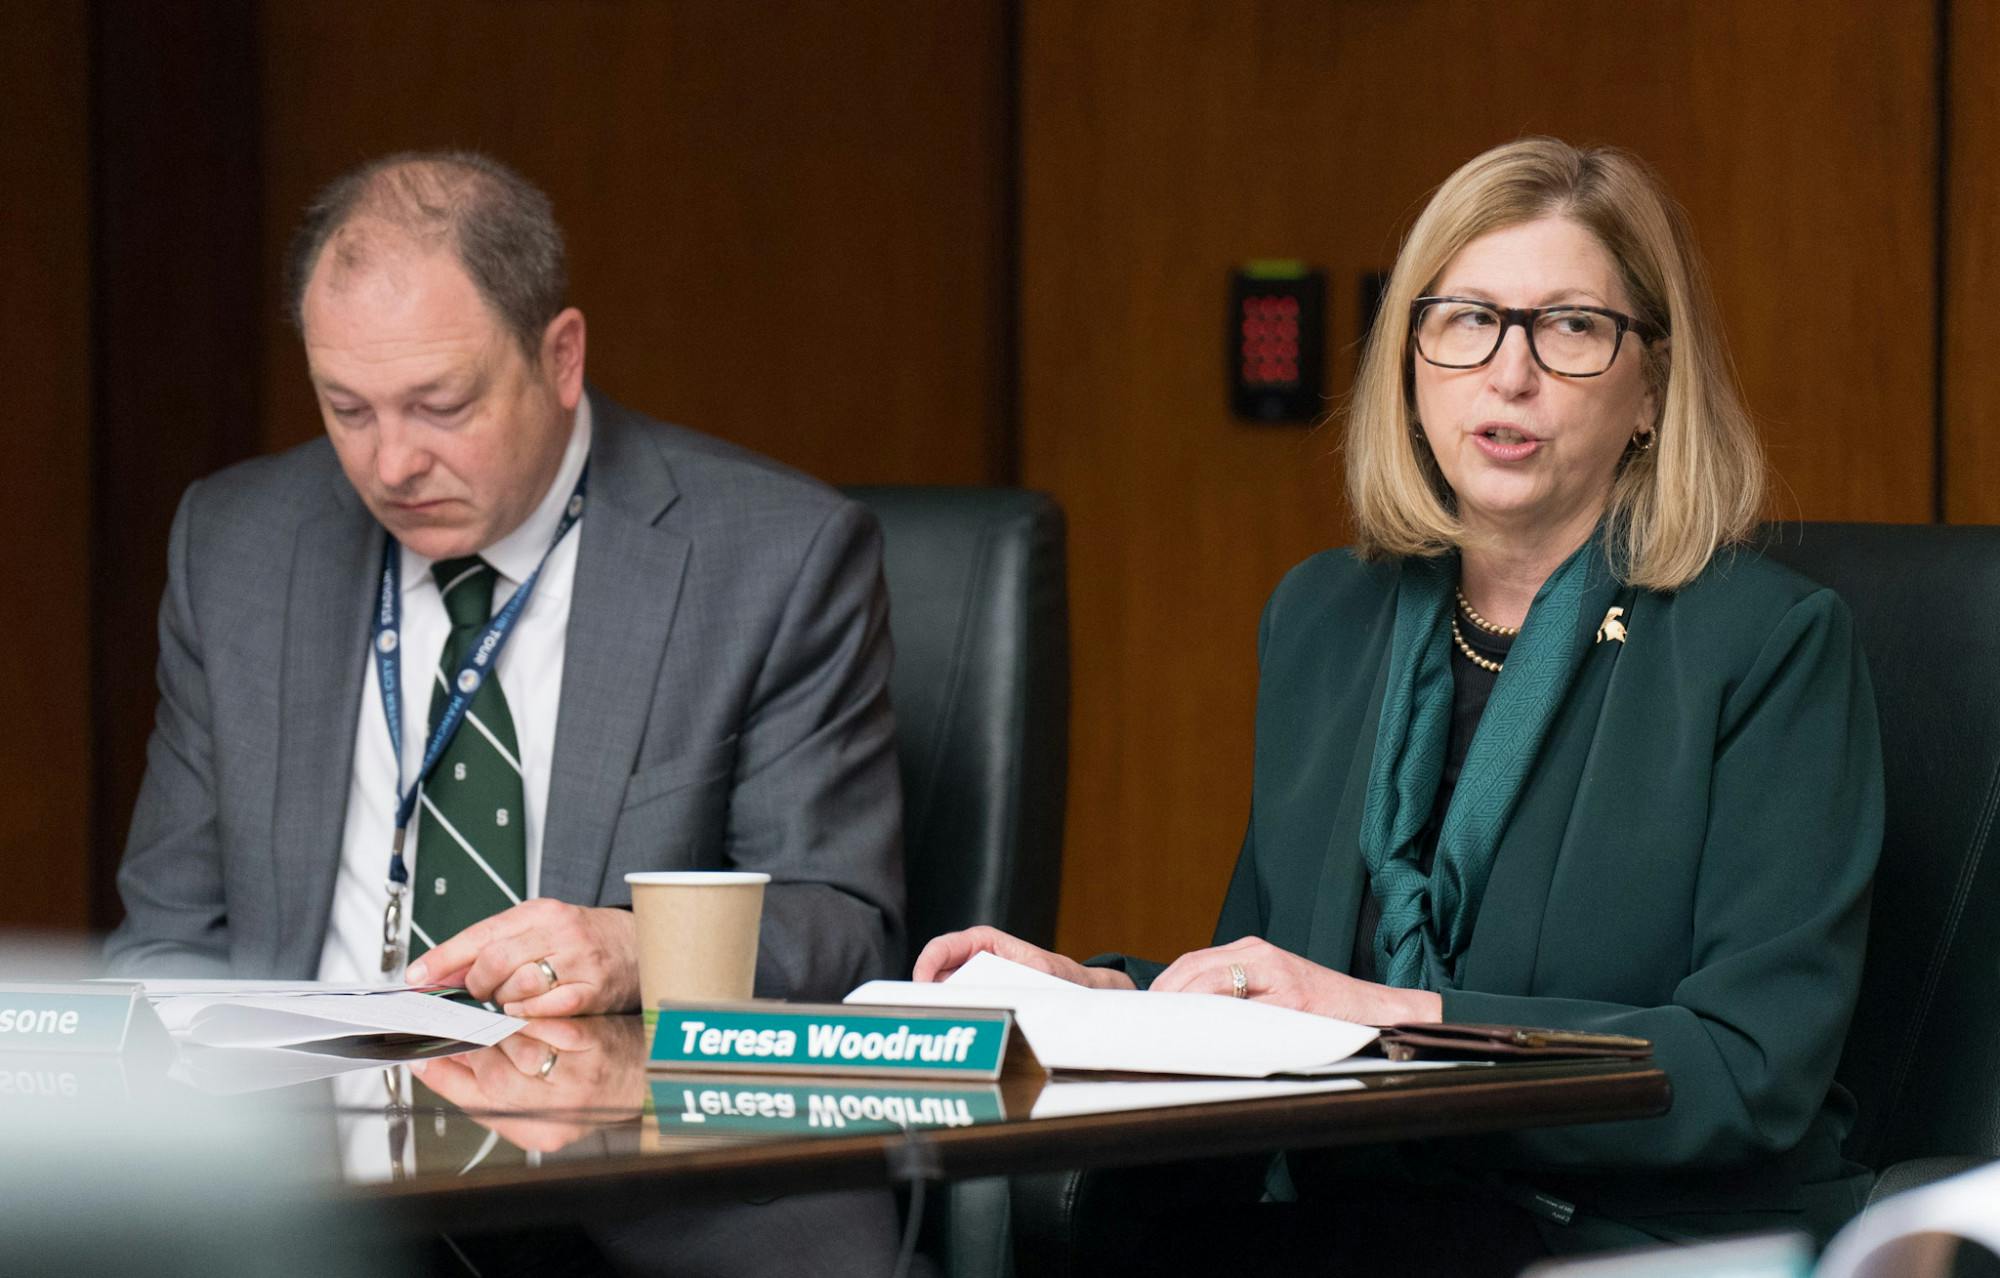 <p>Michigan State Trustee Woodruff presenting the personnel actions and information reports. The Michigan State University Board of Trustees met in the Hannah Administration Building, on April 22, 2022.</p>